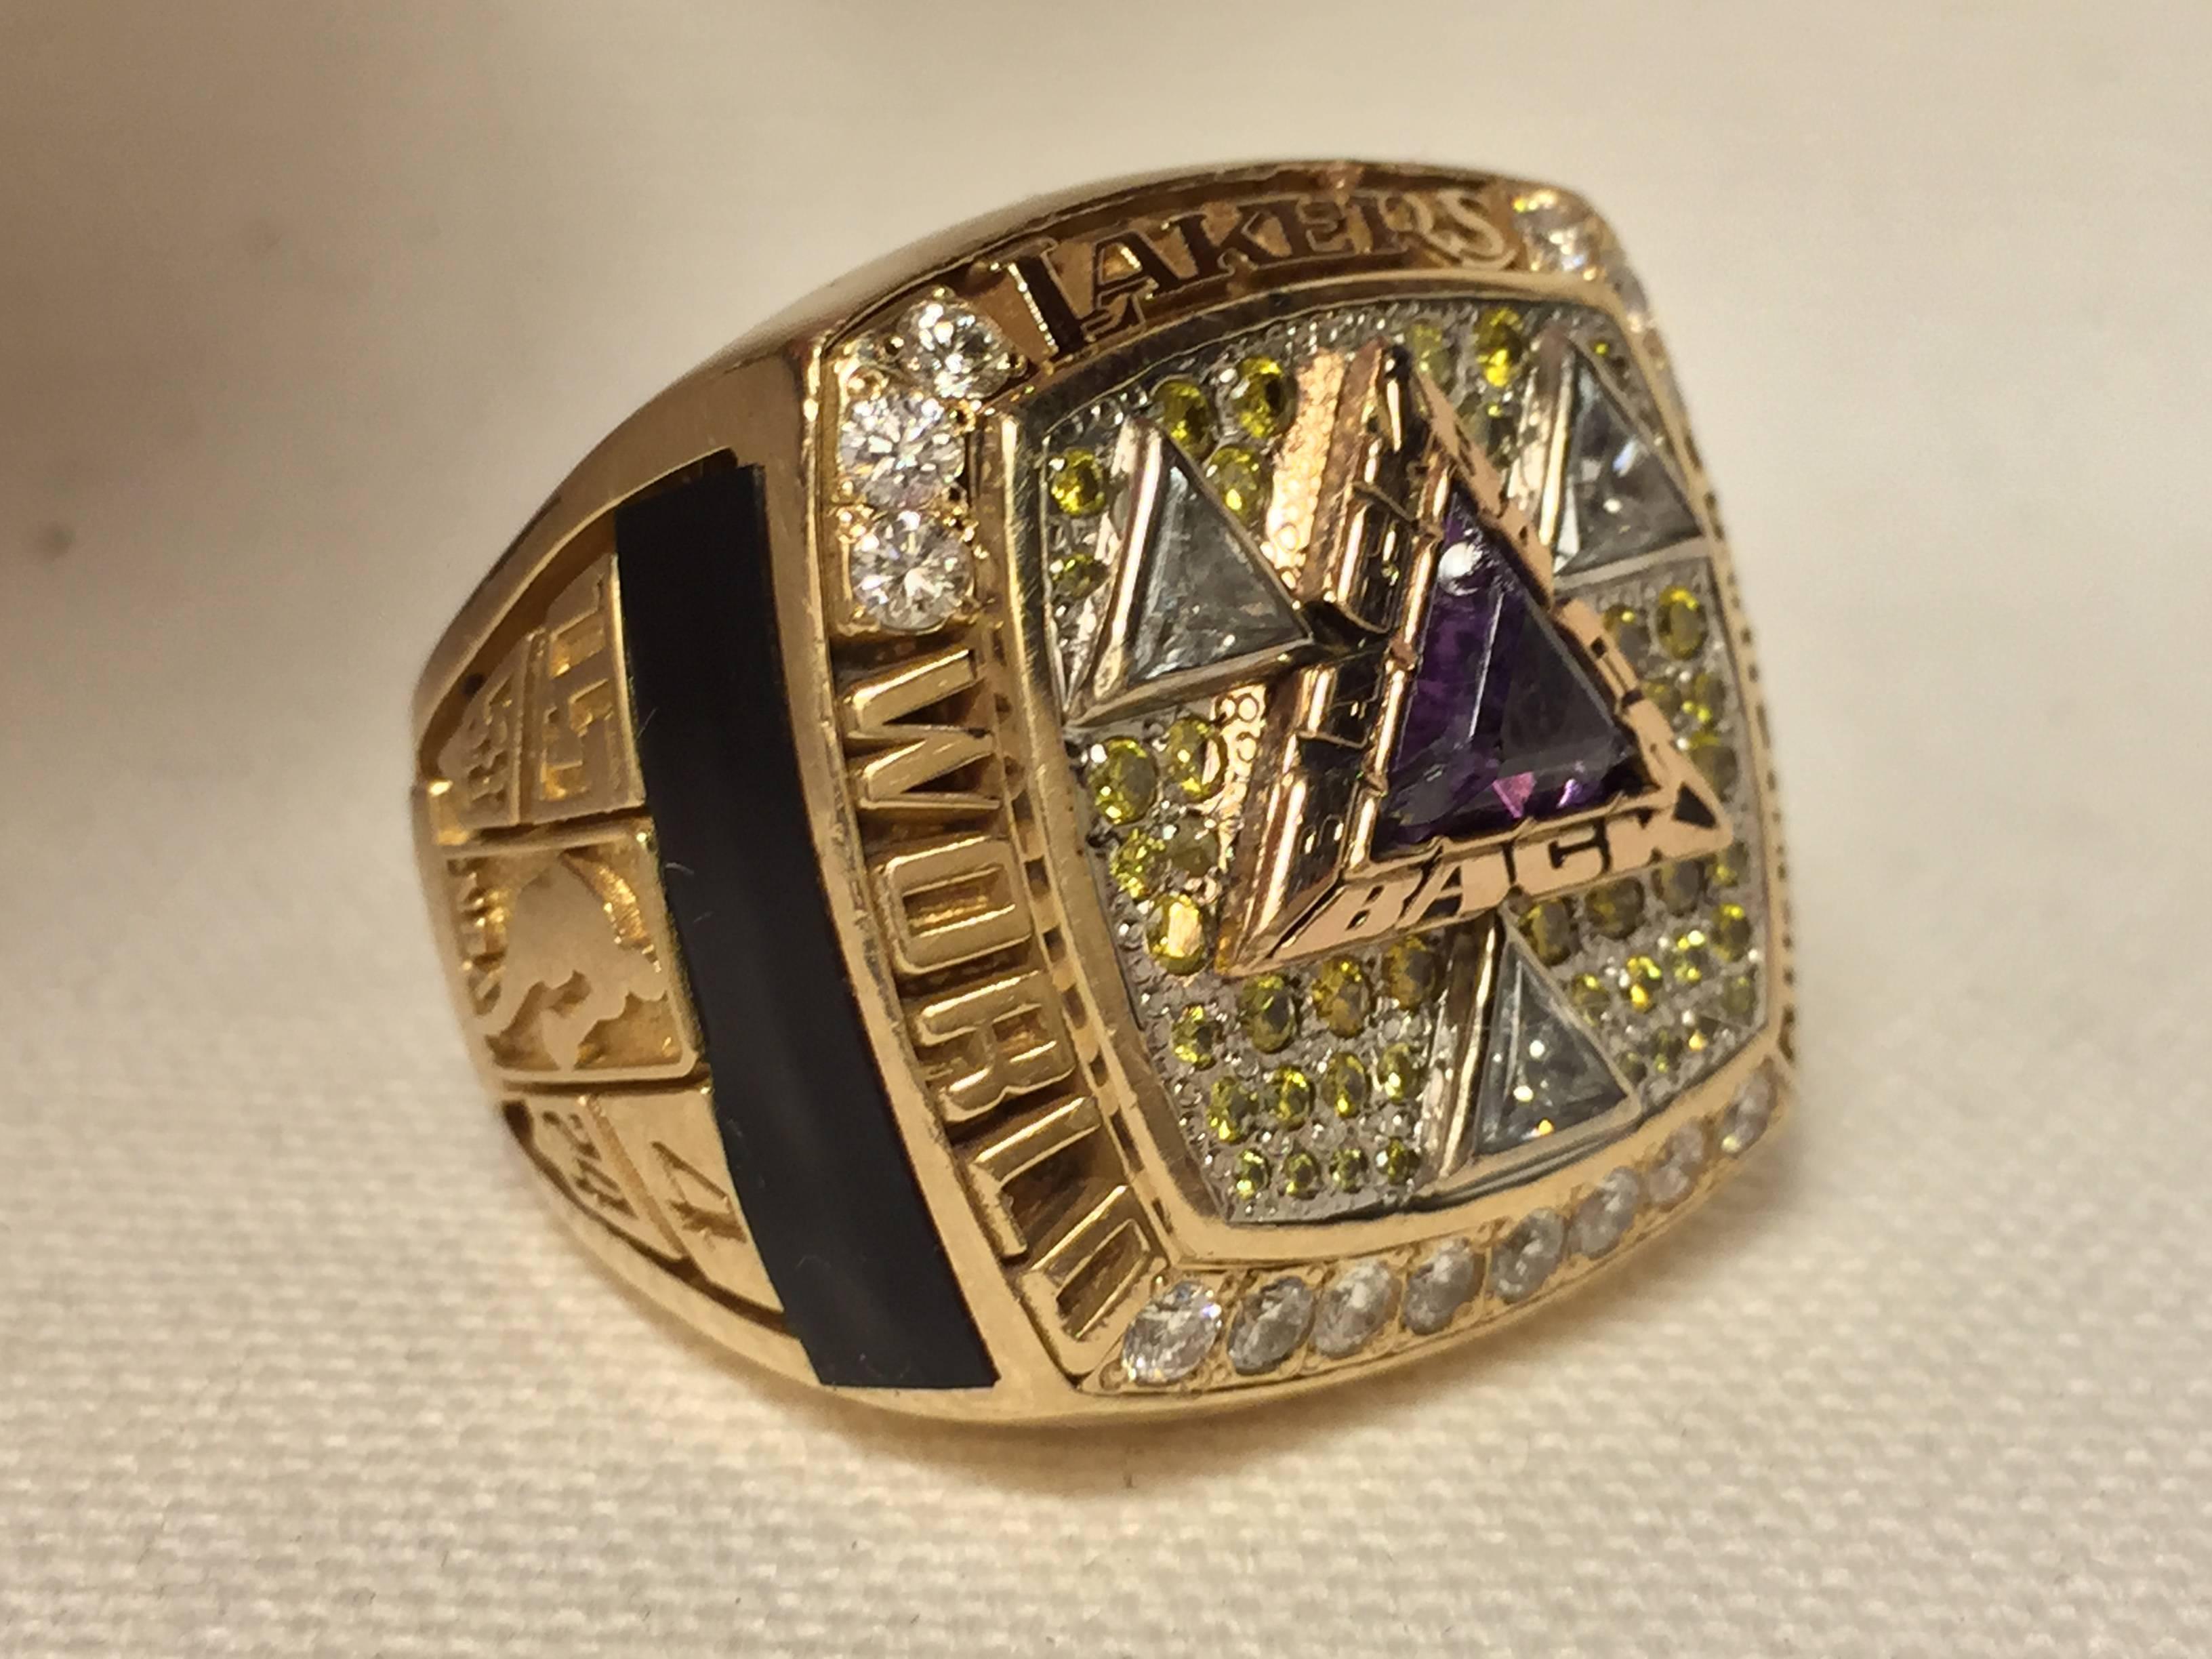 2002 Los Angeles Lakers NBA Championship Ring with Original Presentation Box For Sale 2